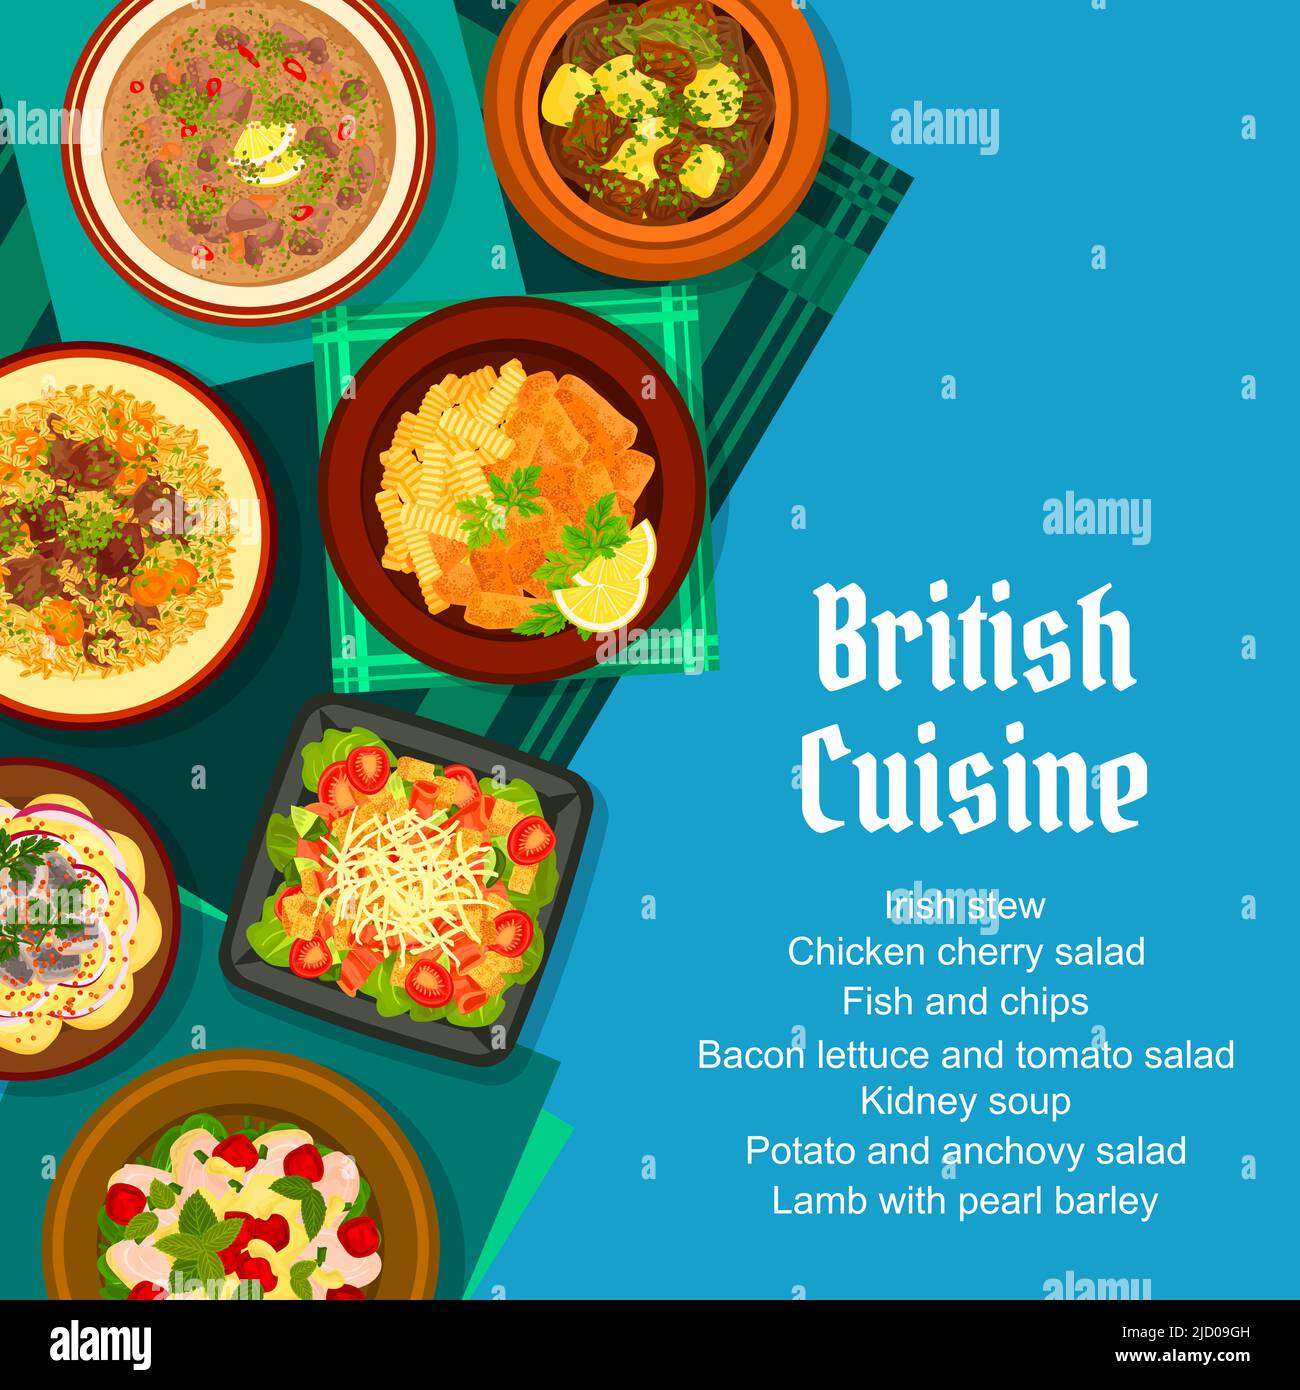 British cuisine menu cover. Potato and anchovy salad, fish with chips and lamb with pearl barley, kidney soup, Irish stew and tomato salad with bacon lettuce, chicken cherry salad Stock Vector